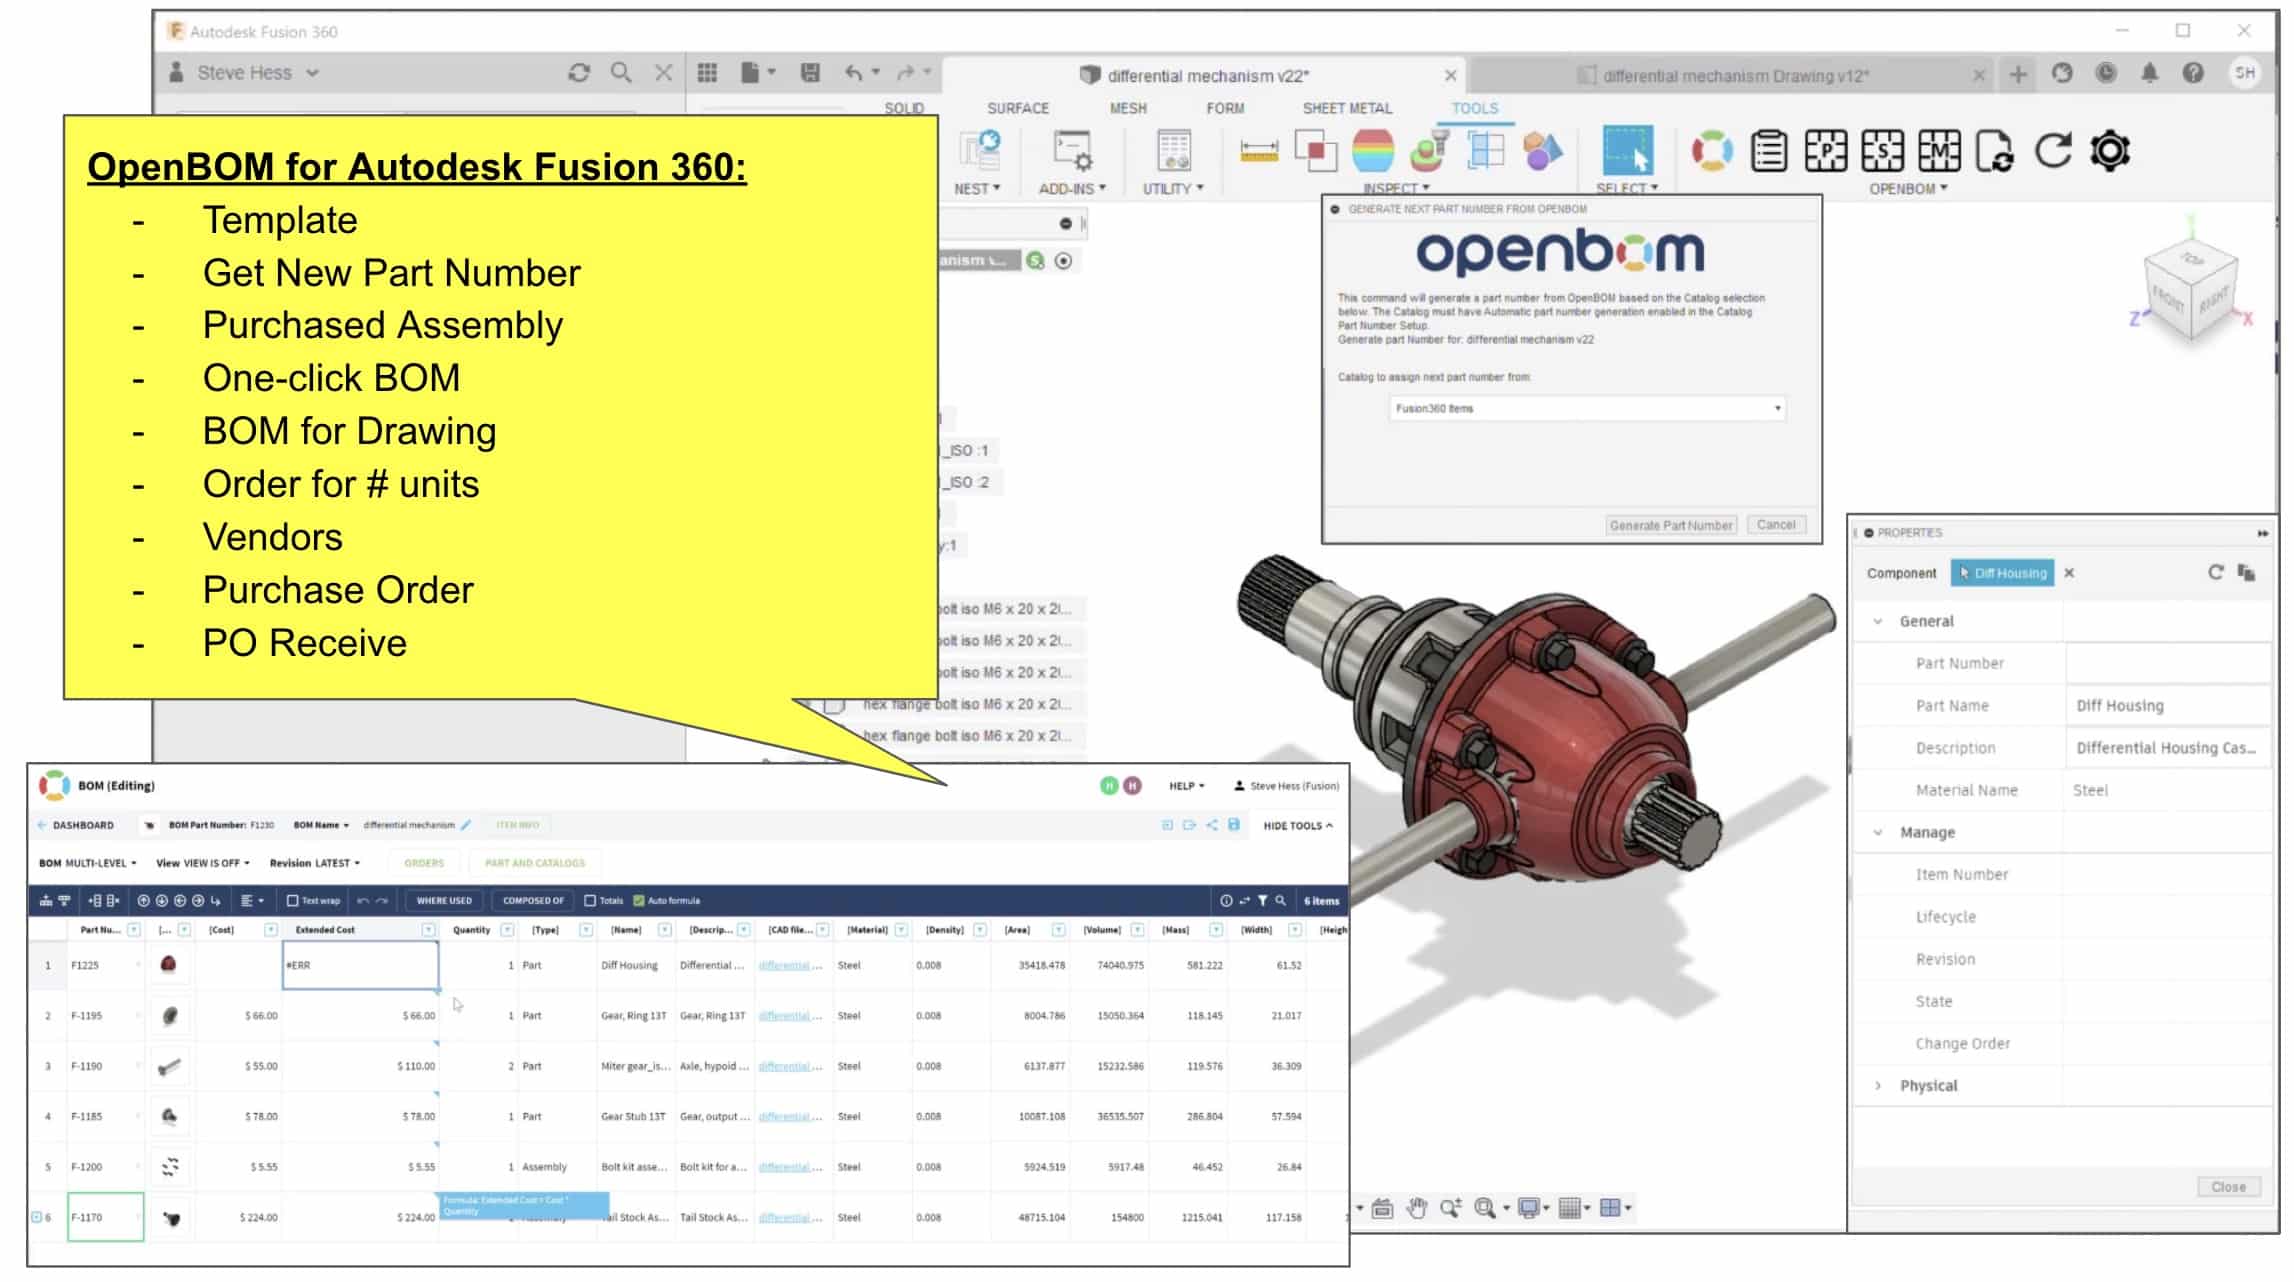 OpenBOM for Autodesk Fusion 360 – New Features and Best Practices